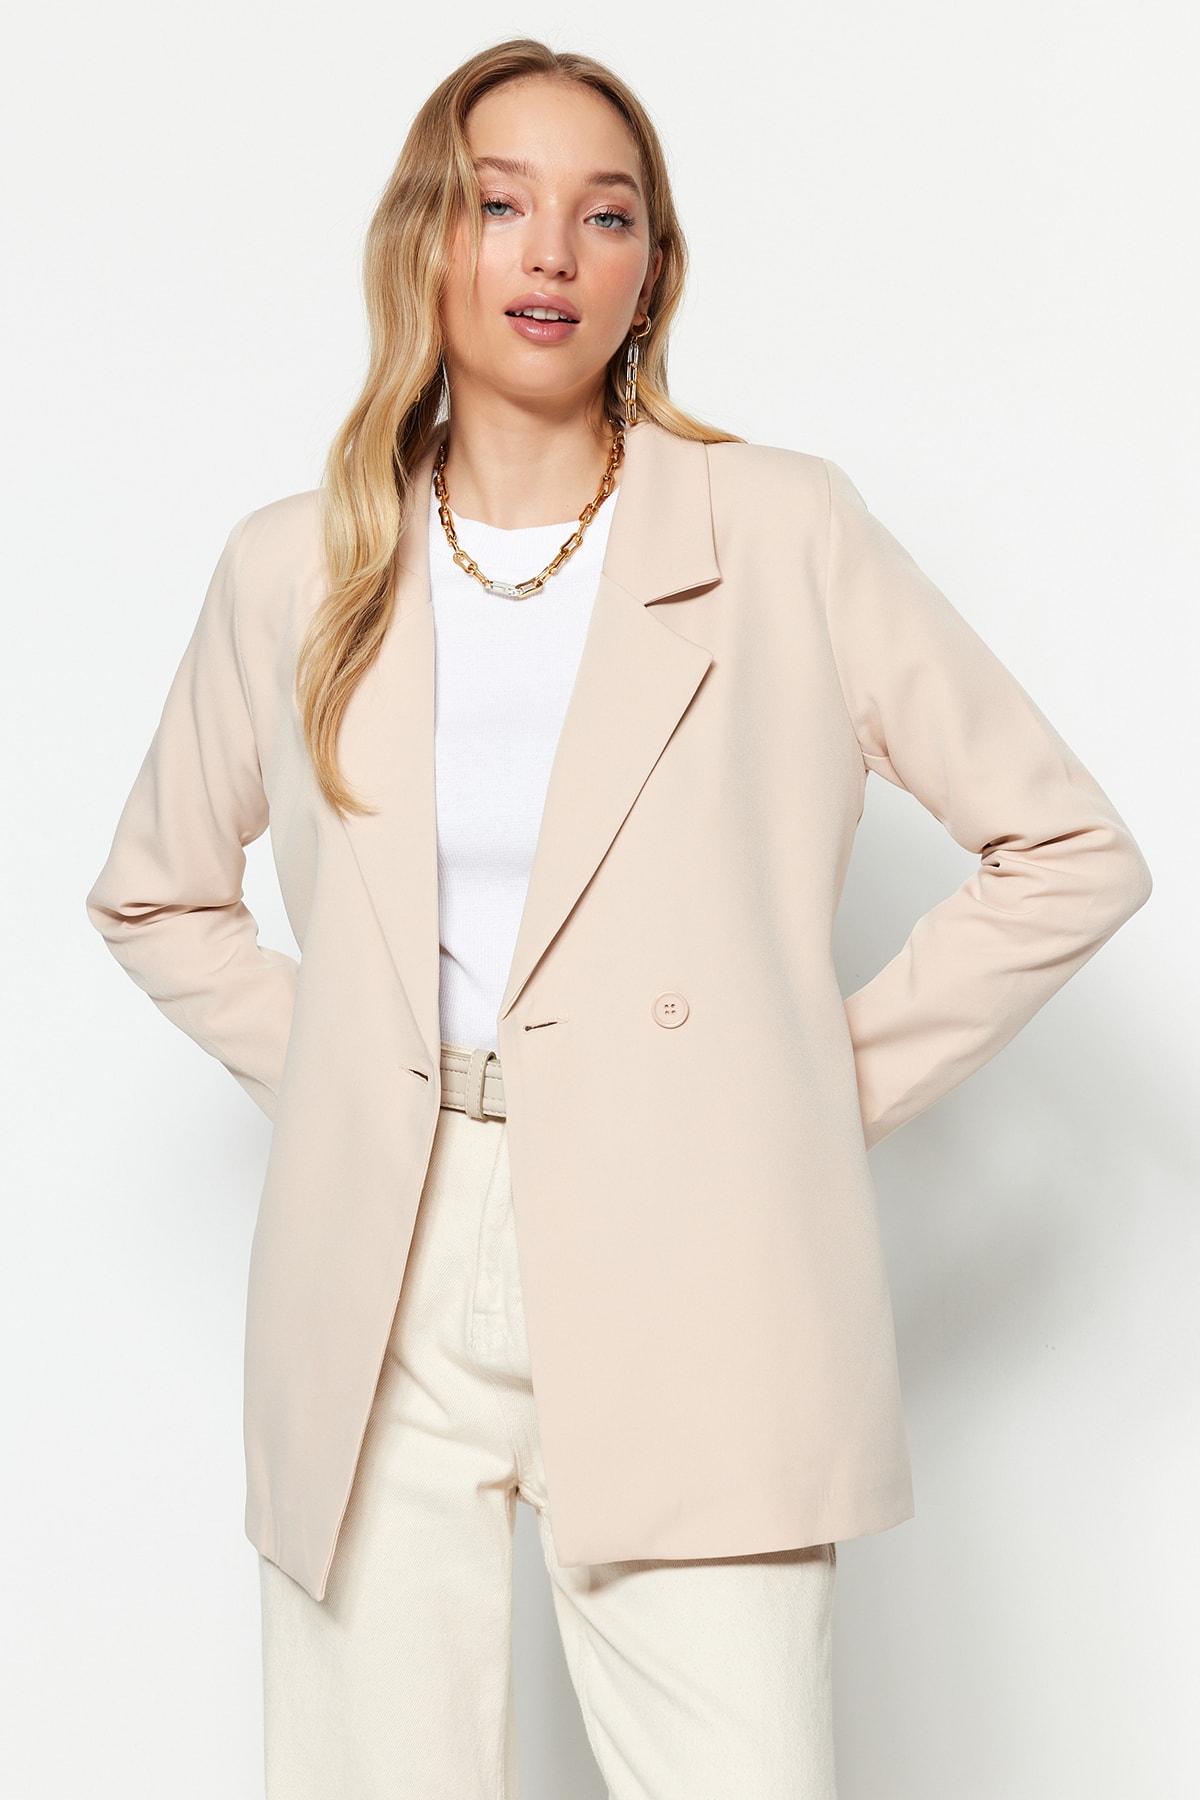 Trendyol Cream Woven Lined Single Button Back Detailed Jacket